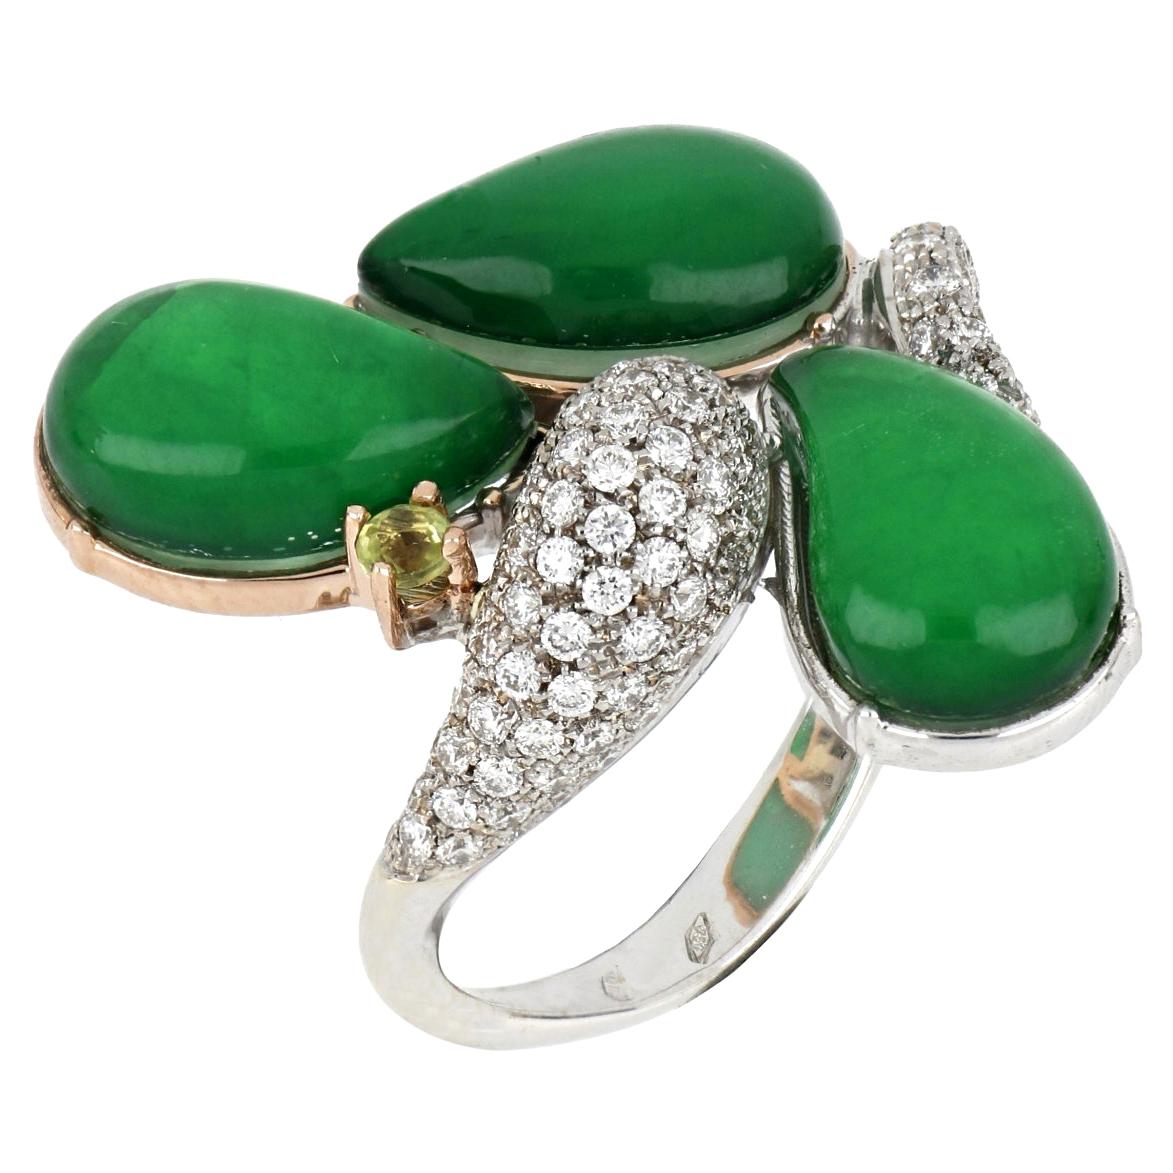 For Sale:  18kt White and Rose Gold Les Fleurs Ring with Green Aventurine and Diamonds